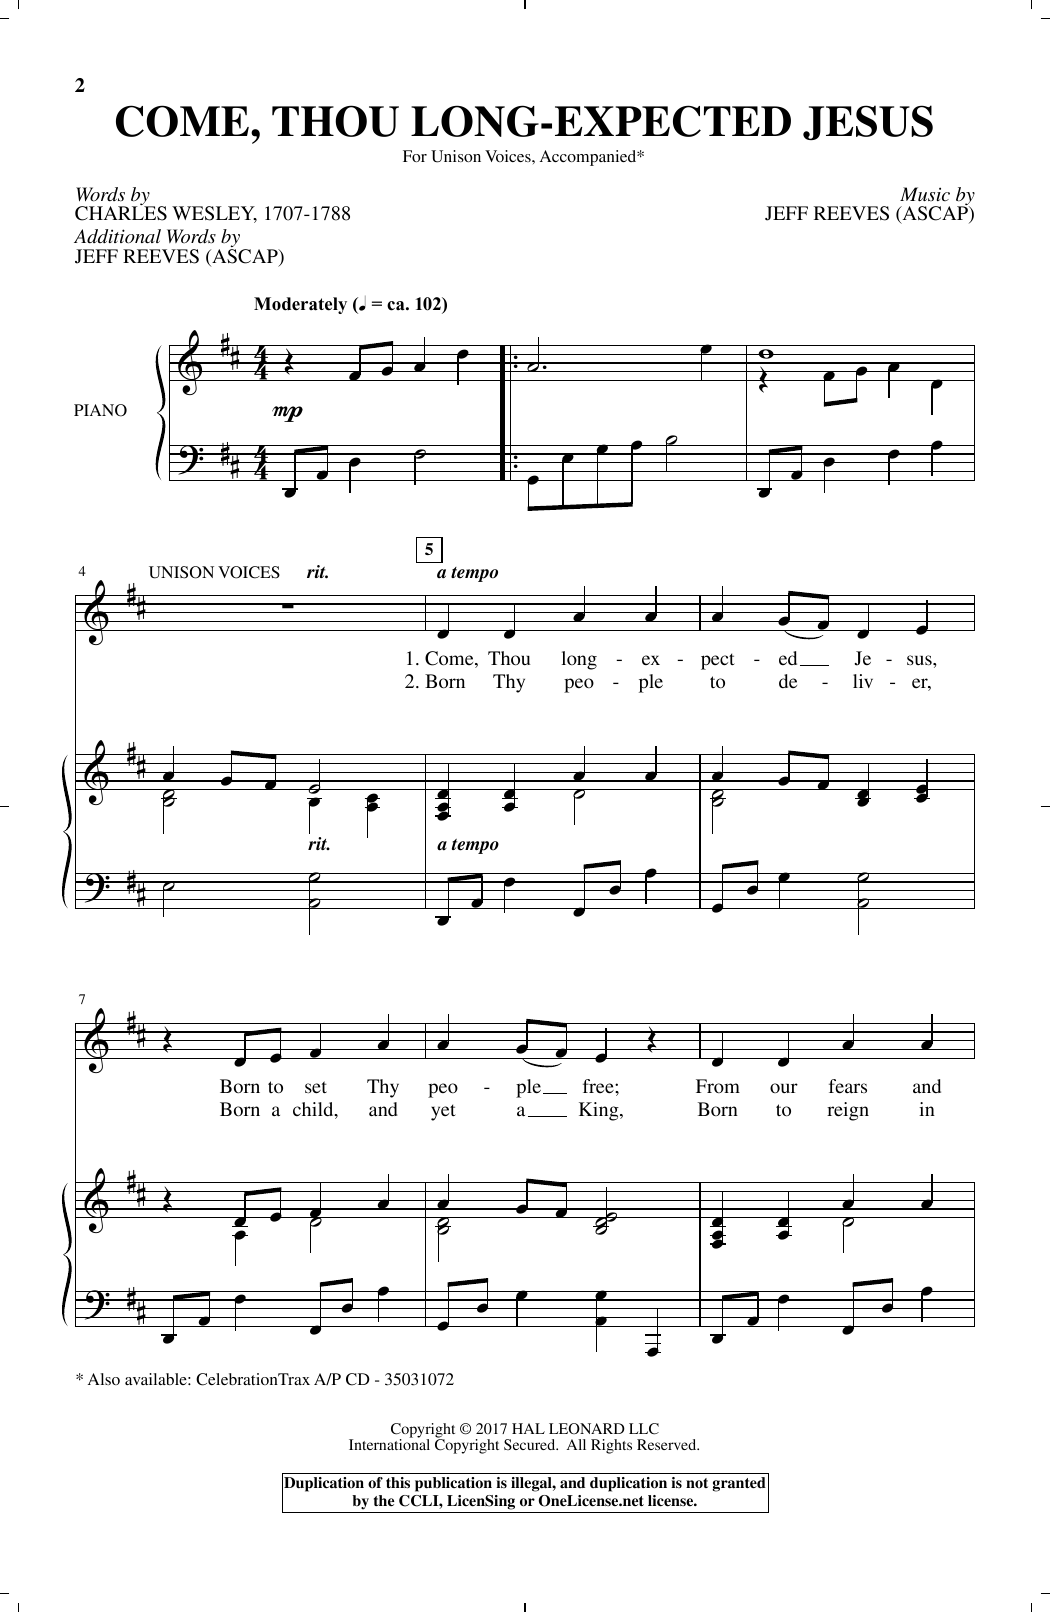 Download Jeff Reeves Come, Thou Long-Expected Jesus Sheet Music